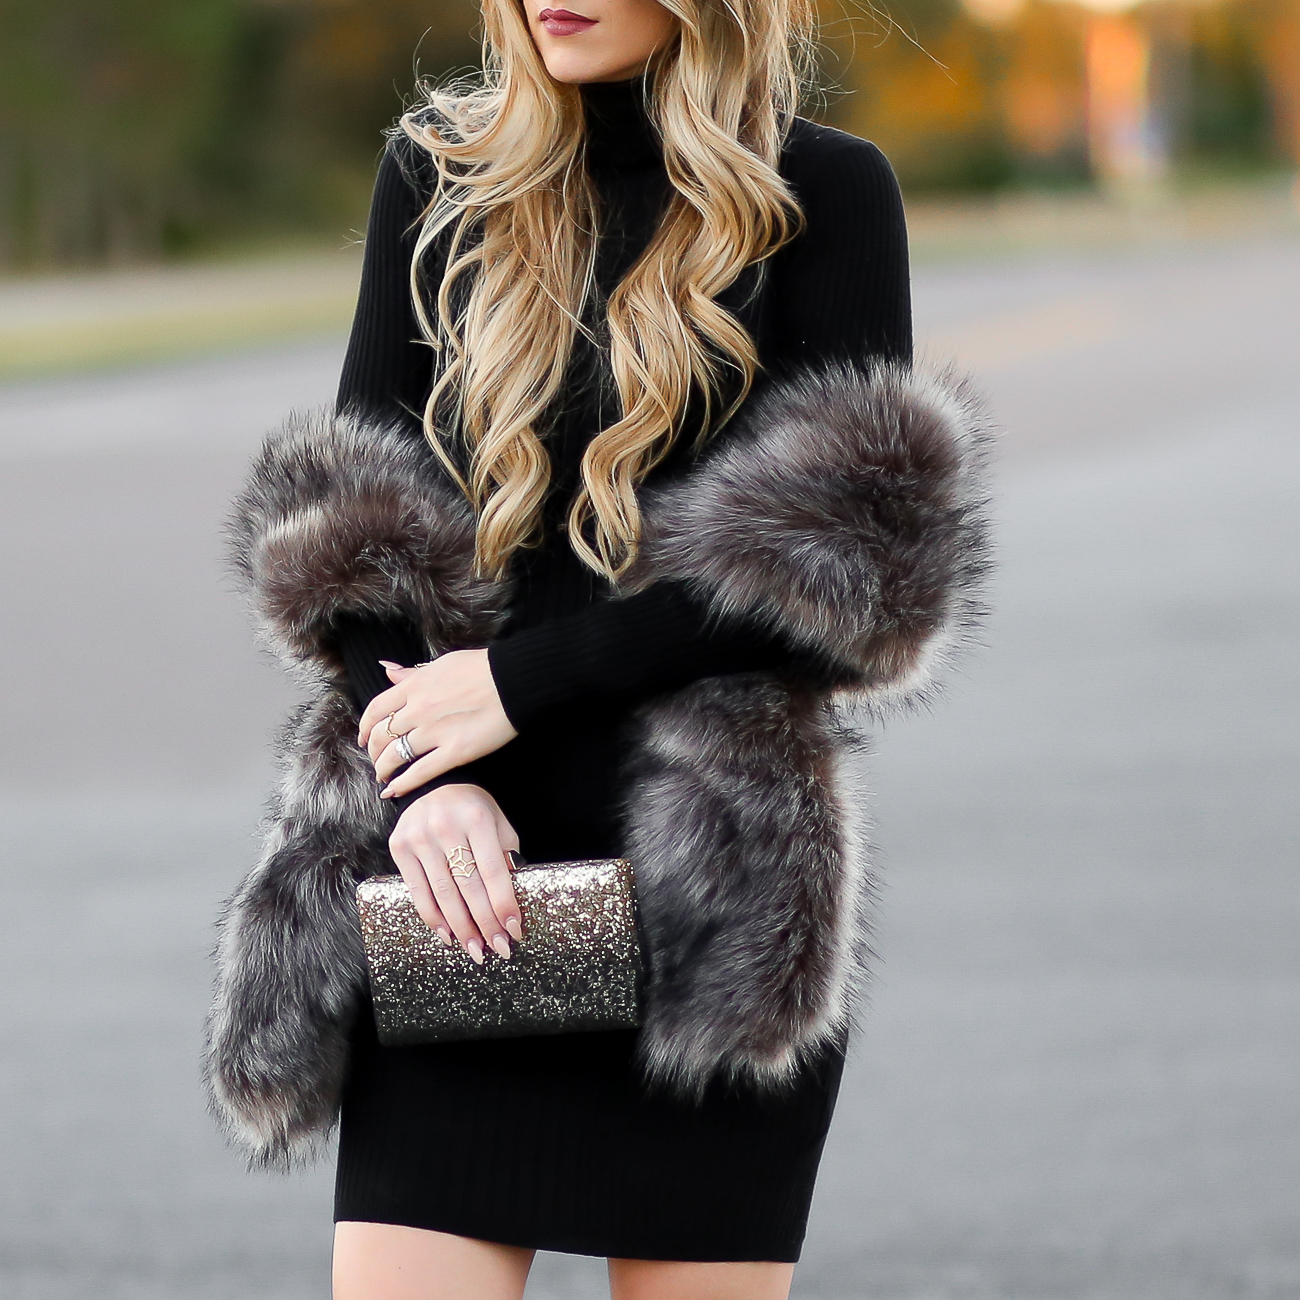 This Holiday Party Look is under $40